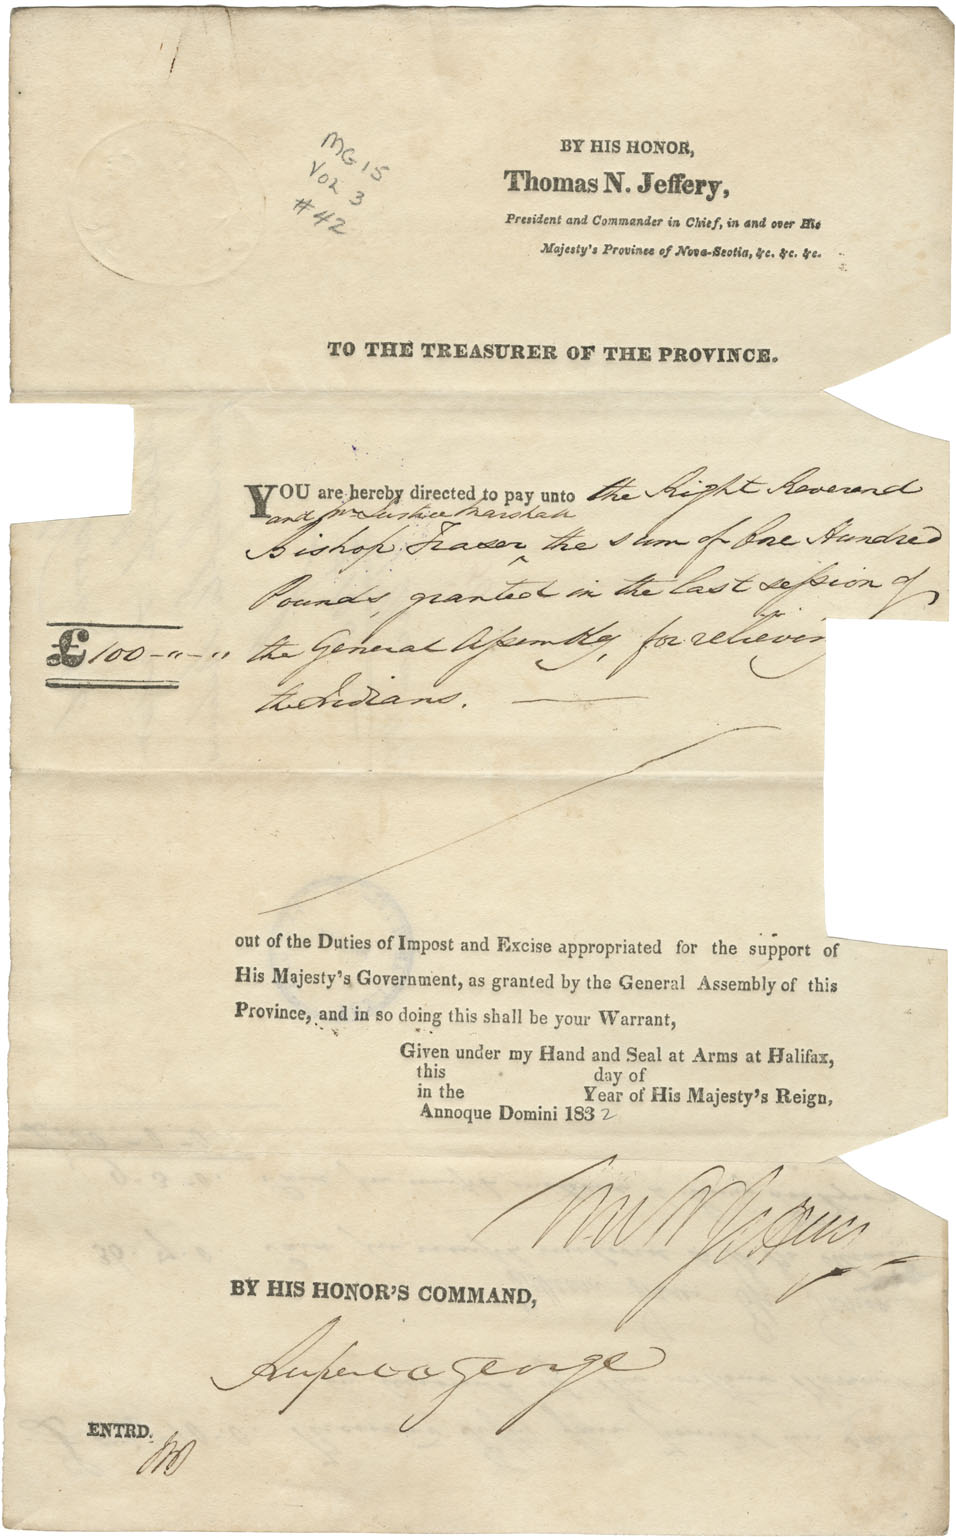 Warrants and receipts for payment for Indian relief to Bishop Fraser (£100), John McGown of Sydney (£9-3-0) and William Allan (£36-7-0) from Rupert George.